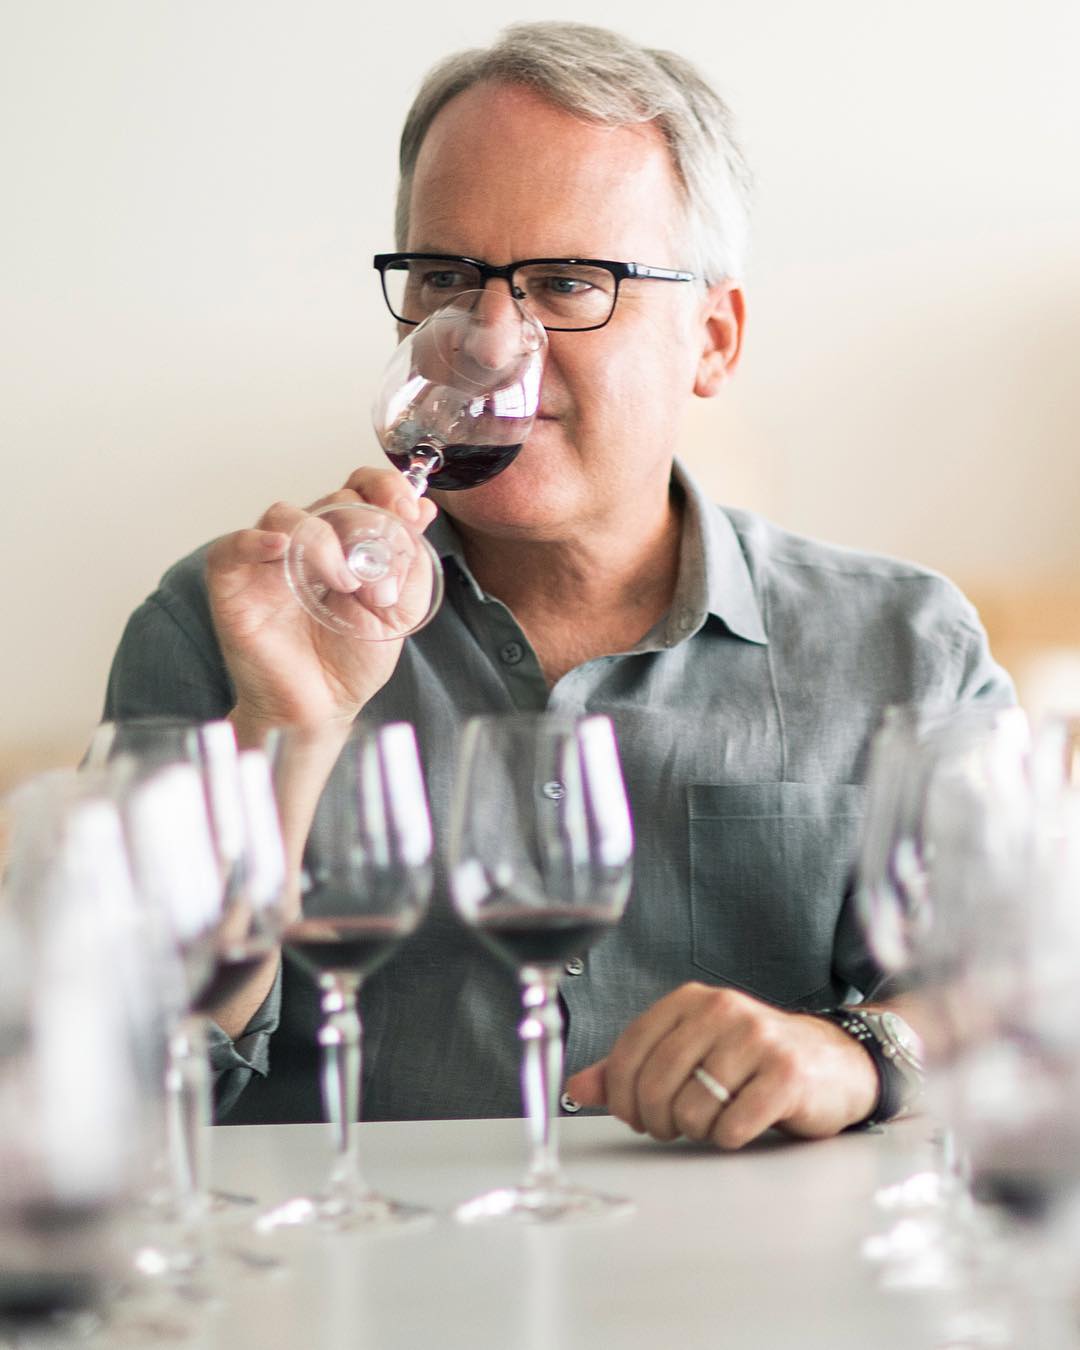 Online Instructor Teaching a Wine-Tasting Class. Photo by Instagram user @masterclass